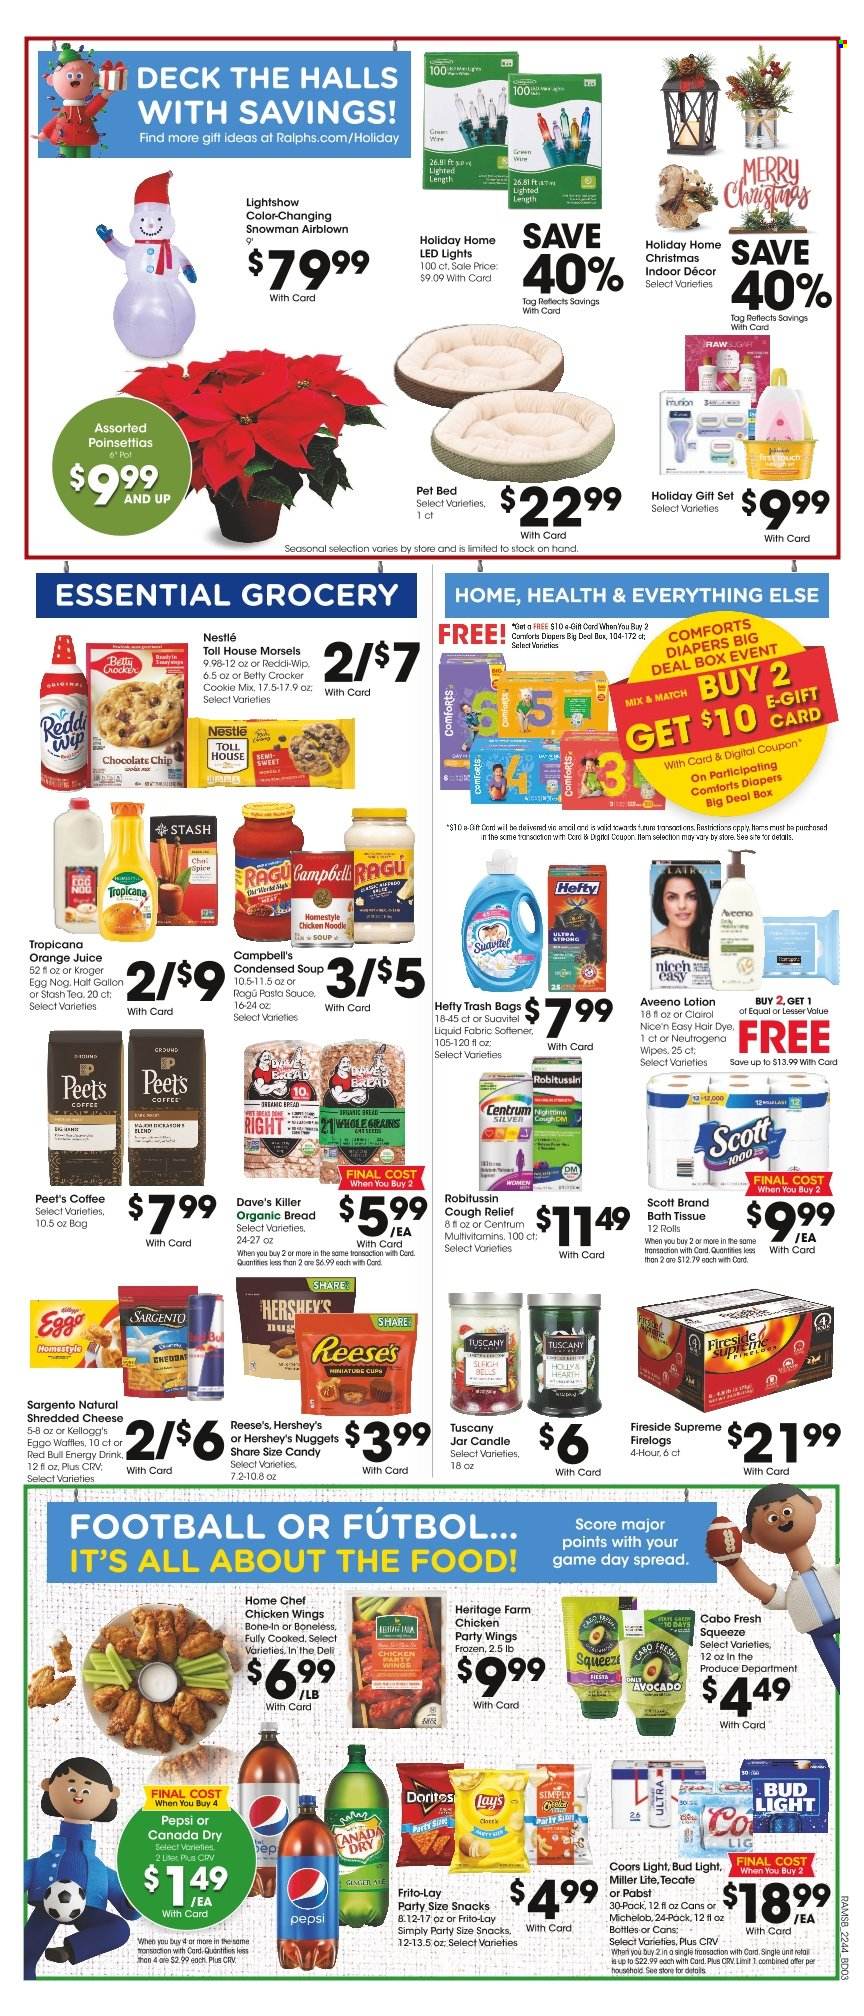 thumbnail - Ralphs Flyer - 11/30/2022 - 12/06/2022 - Sales products - bread, waffles, avocado, Campbell's, pasta sauce, condensed soup, soup, nuggets, noodles, instant soup, ragú pasta, shredded cheese, Sargento, eggs, Reese's, Hershey's, chicken wings, gift set, Nestlé, Halls, chocolate chips, snack, Kellogg's, Lay’s, Frito-Lay, spice, ragu, Canada Dry, Pepsi, orange juice, juice, Red Bull, tea, coffee, beer, Bud Light, wipes, nappies, Aveeno, bath tissue, Scott, fabric softener, Neutrogena, Clairol, body lotion, Hefty, trash bags, pet bed, LED light, pot, poinsettia, multivitamin, Robitussin, Centrum, Miller Lite, Coors, Michelob. Page 6.